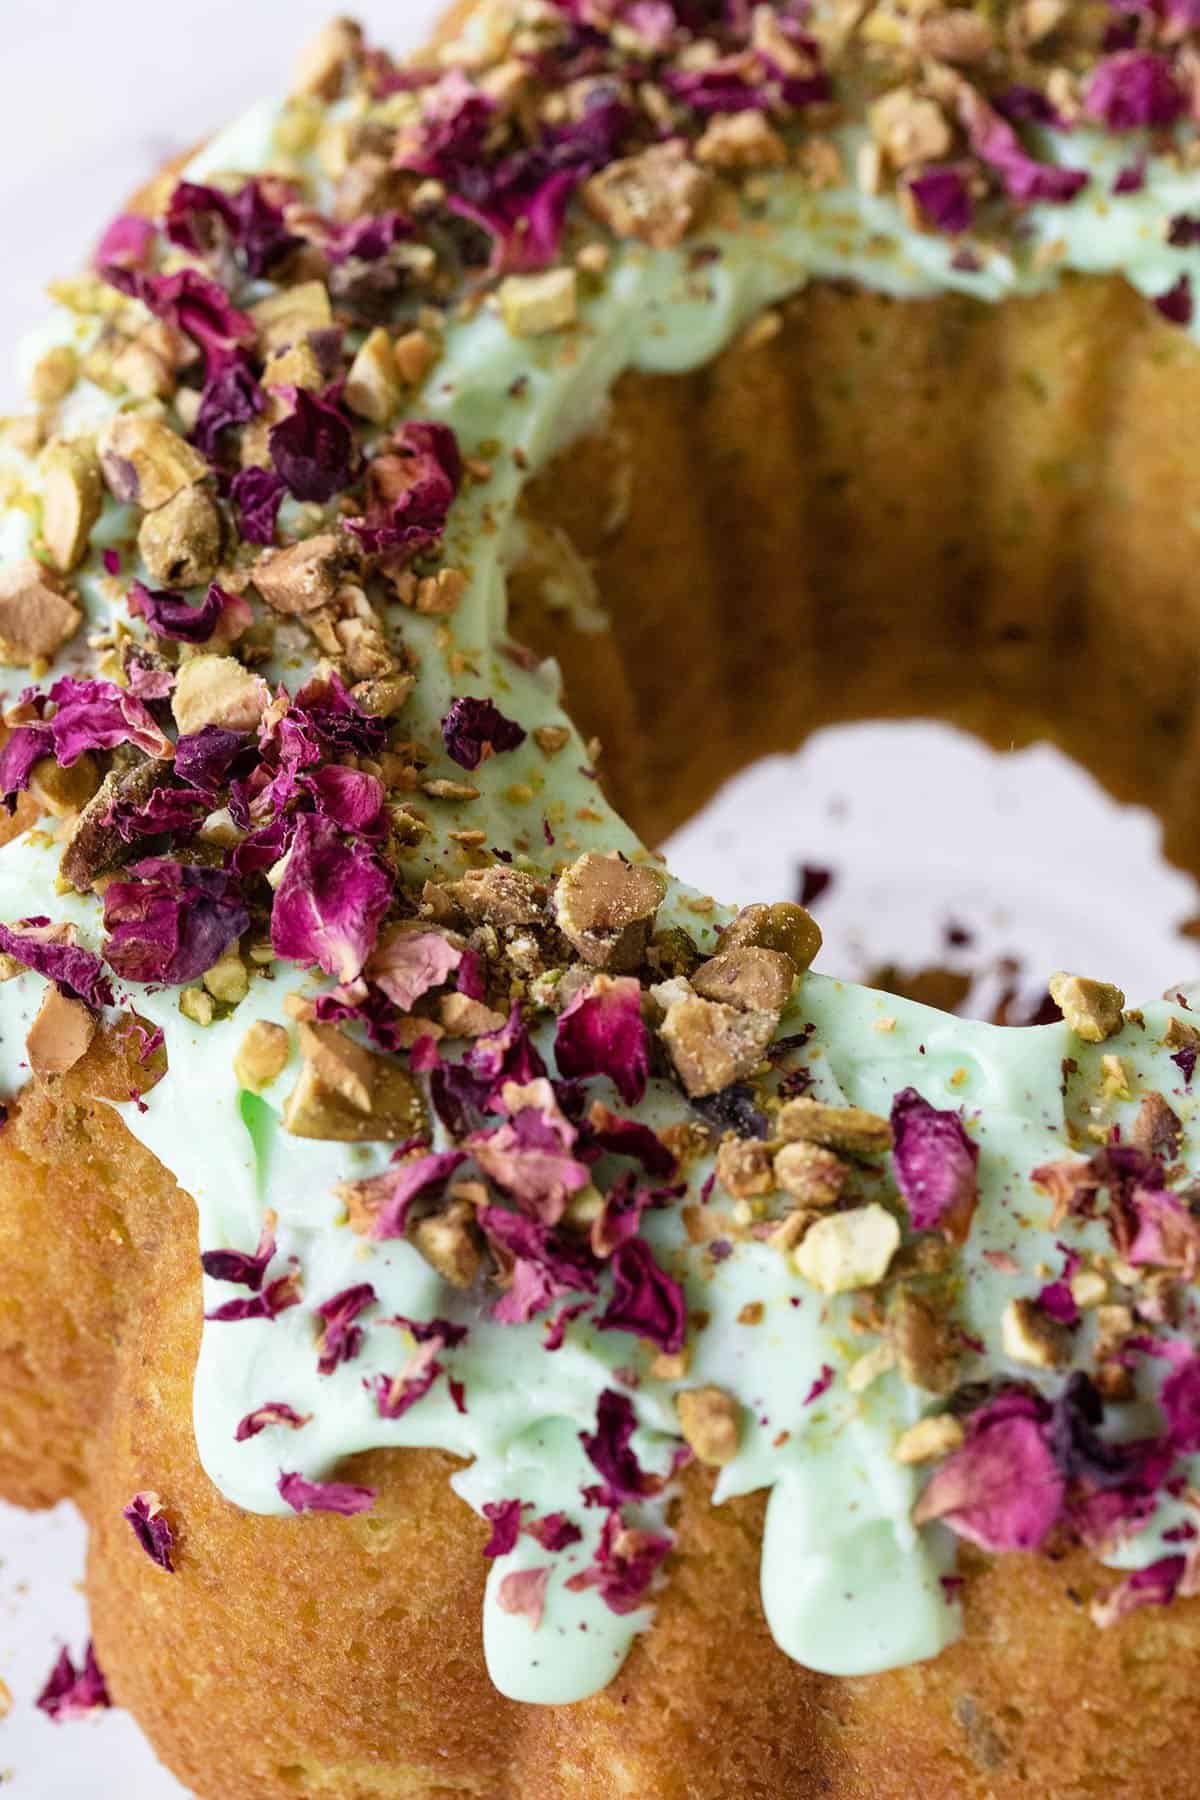 Pistachio bundt cake with green frosting and edible rose petals.